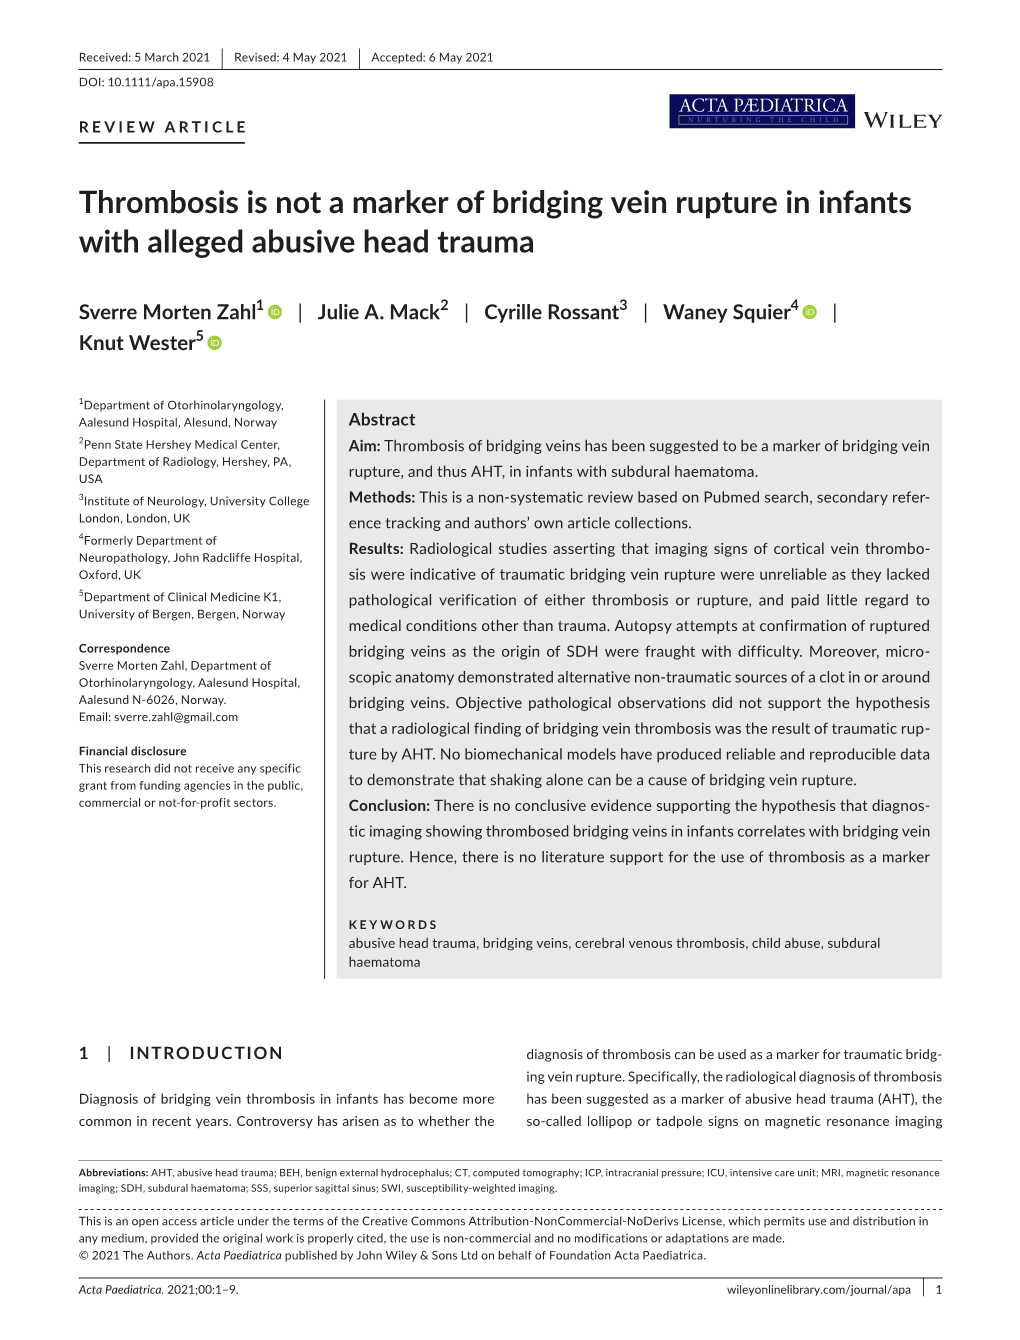 Thrombosis Is Not a Marker of Bridging Vein Rupture in Infants with Alleged Abusive Head Trauma